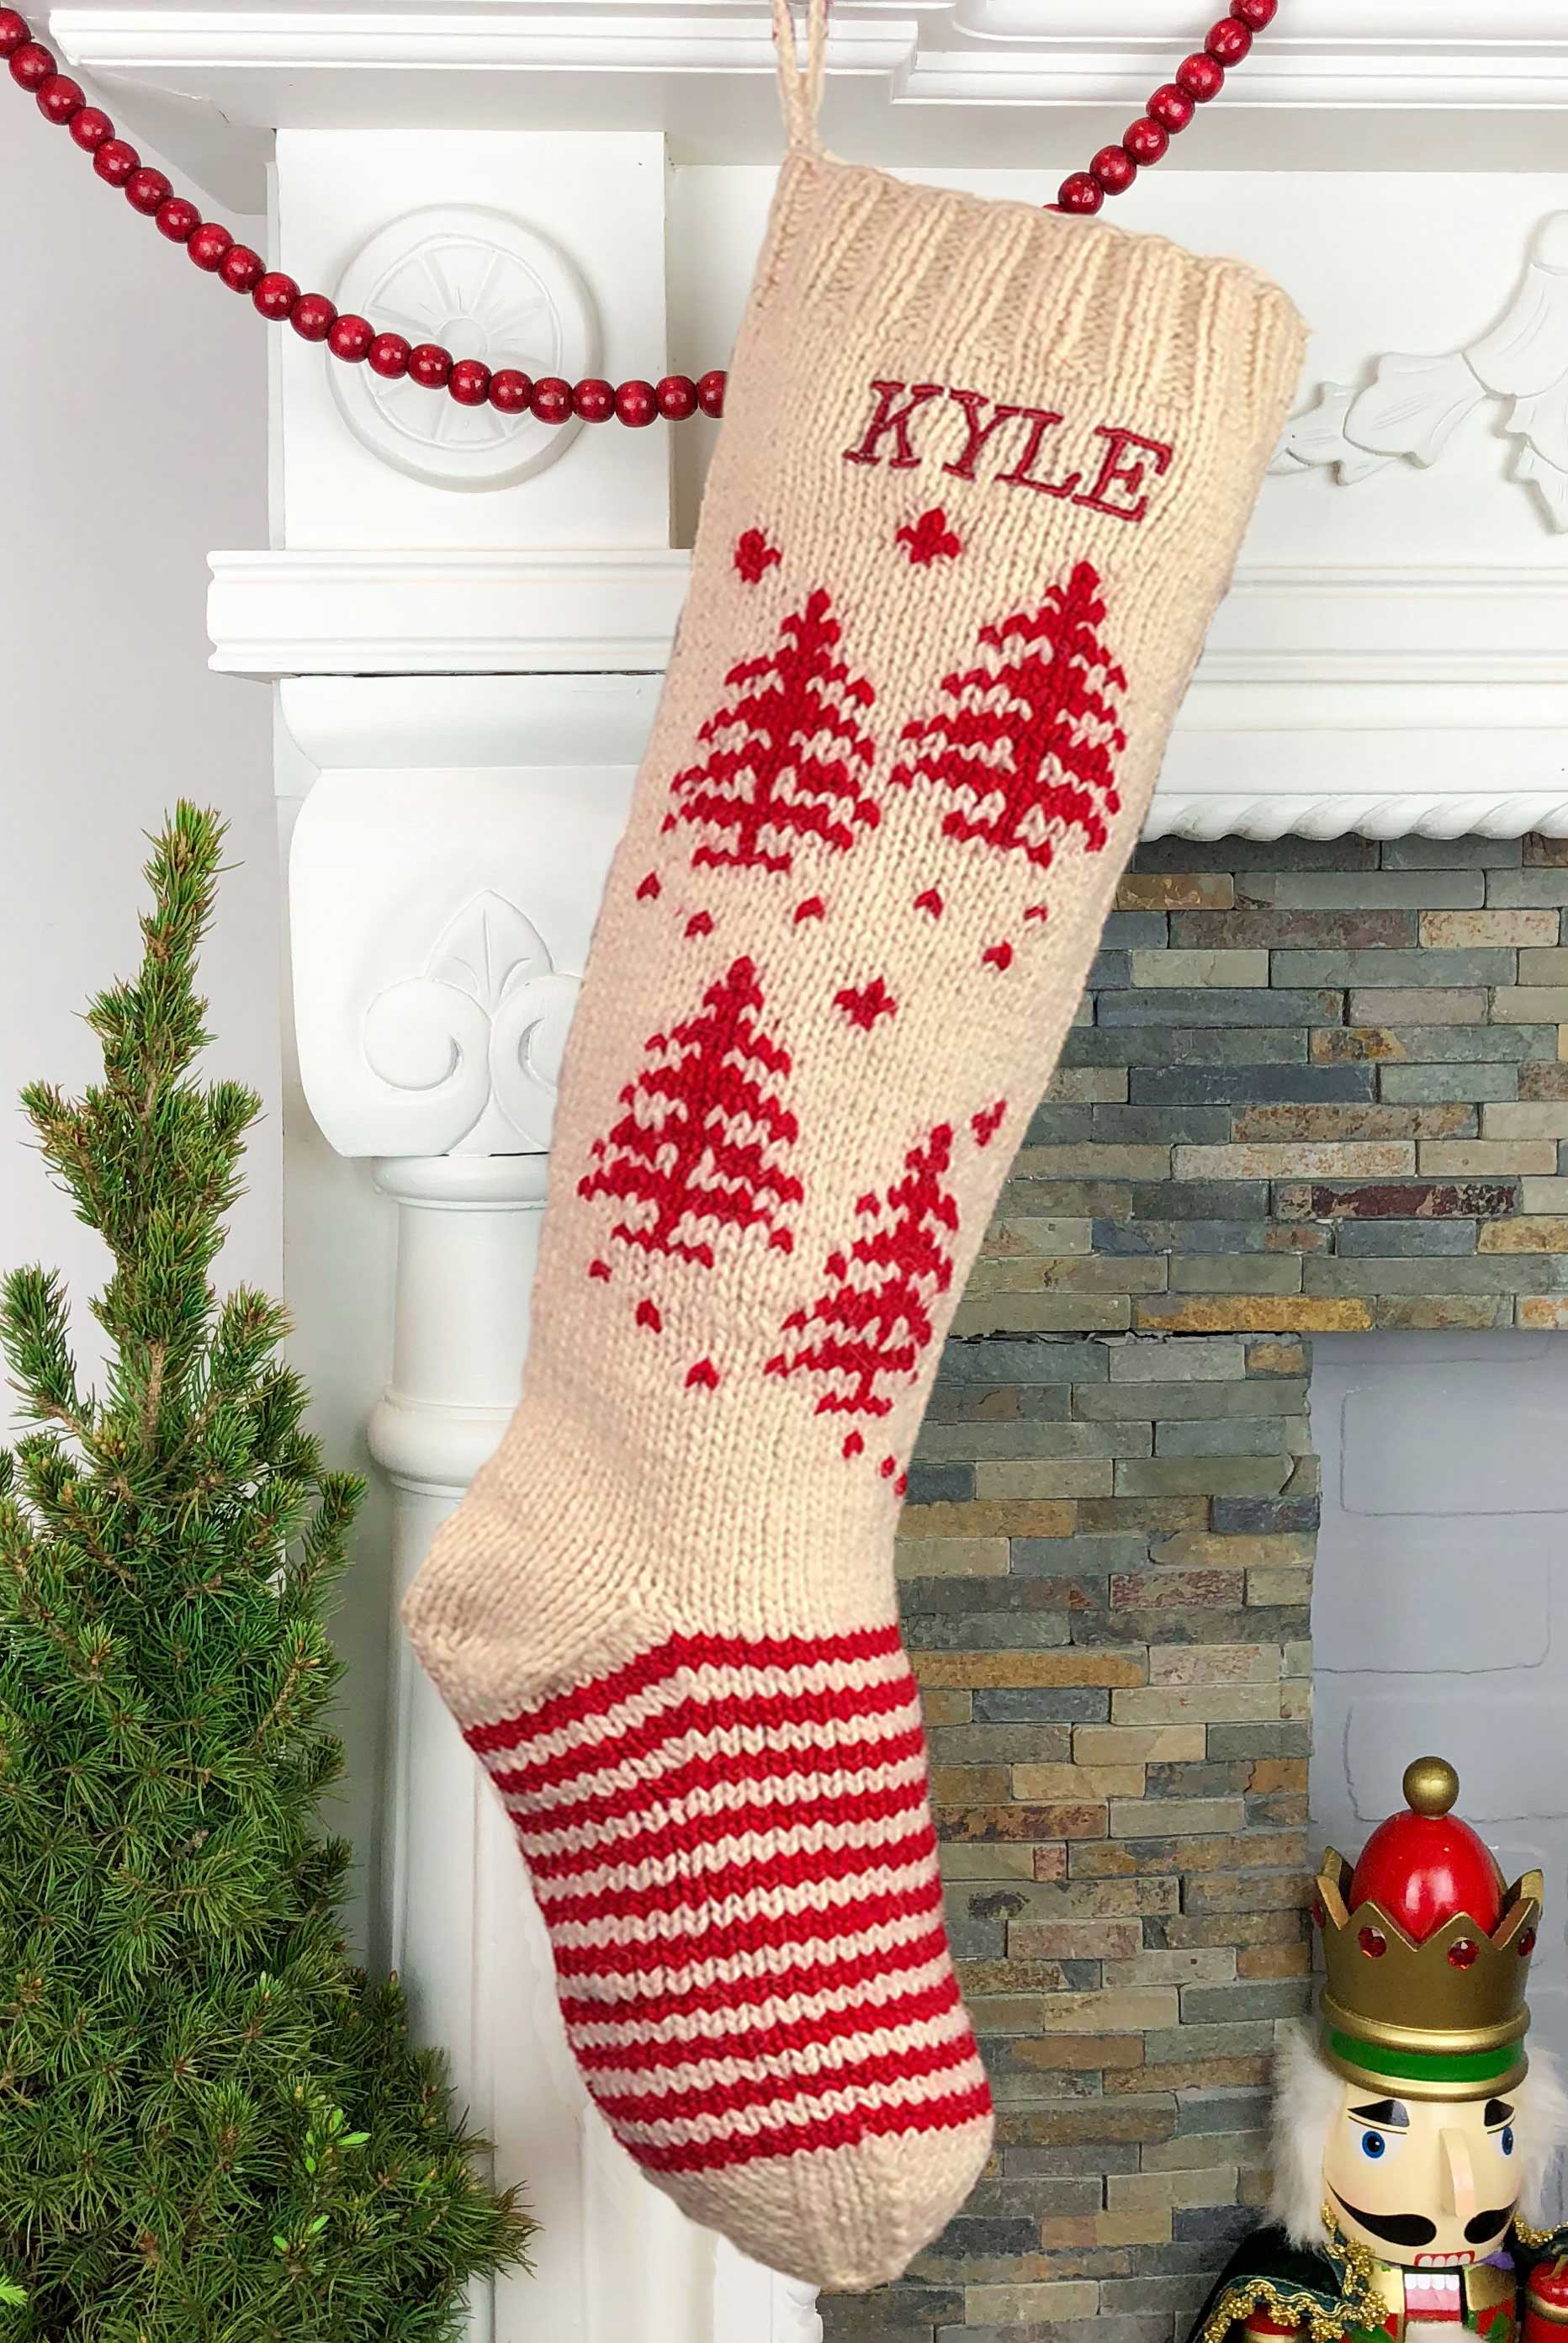 Personalized Angel Christmas Stocking – Hand Knit Holiday